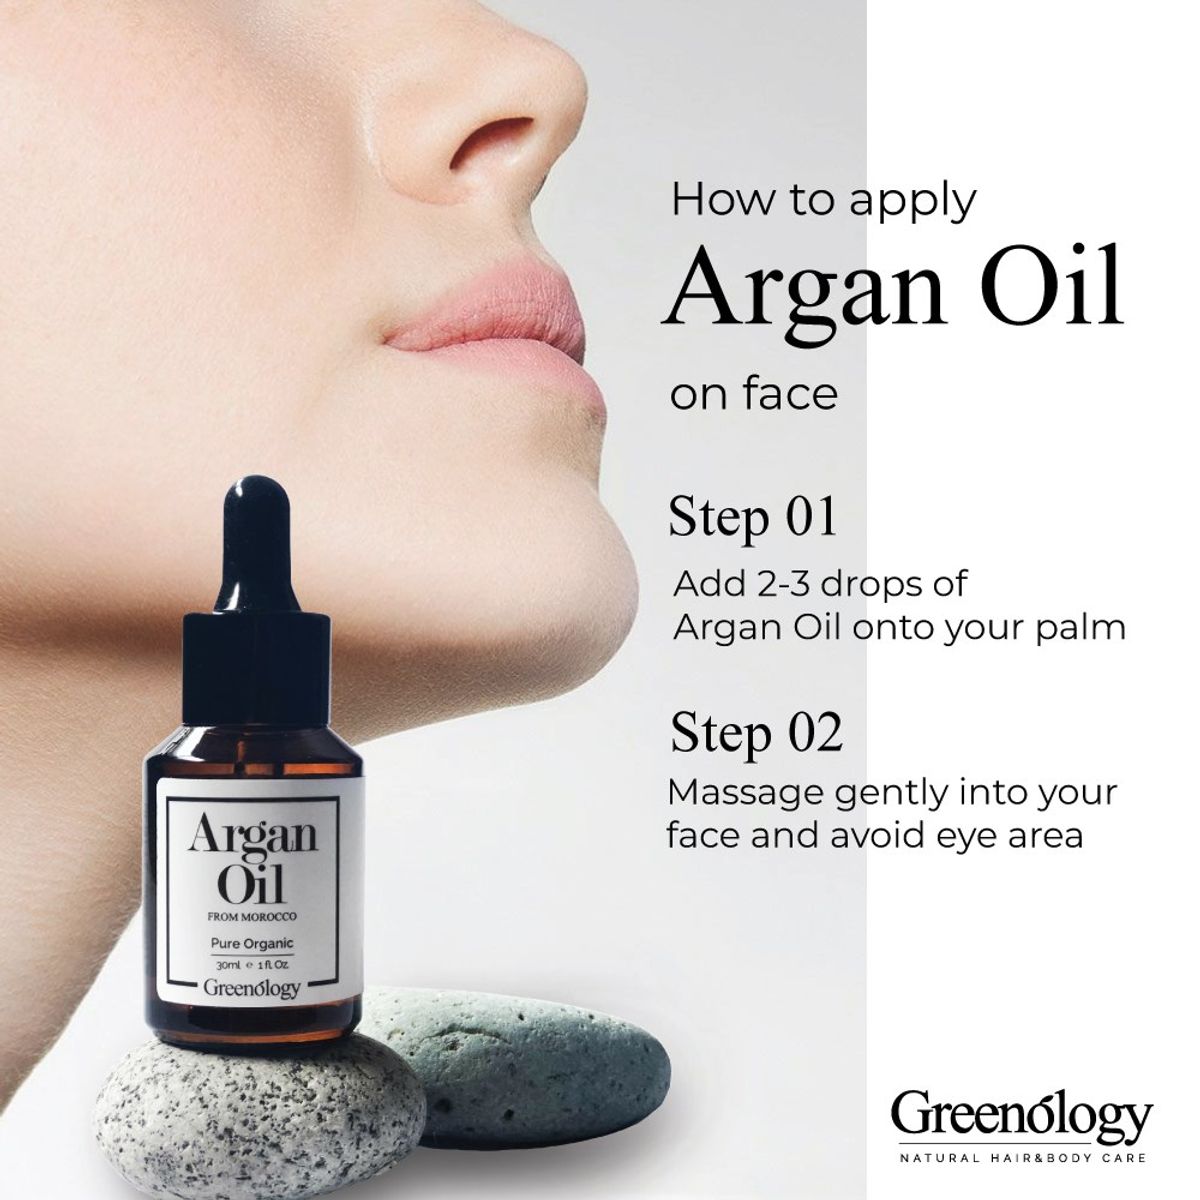 How To Apply Argan Oil On Face